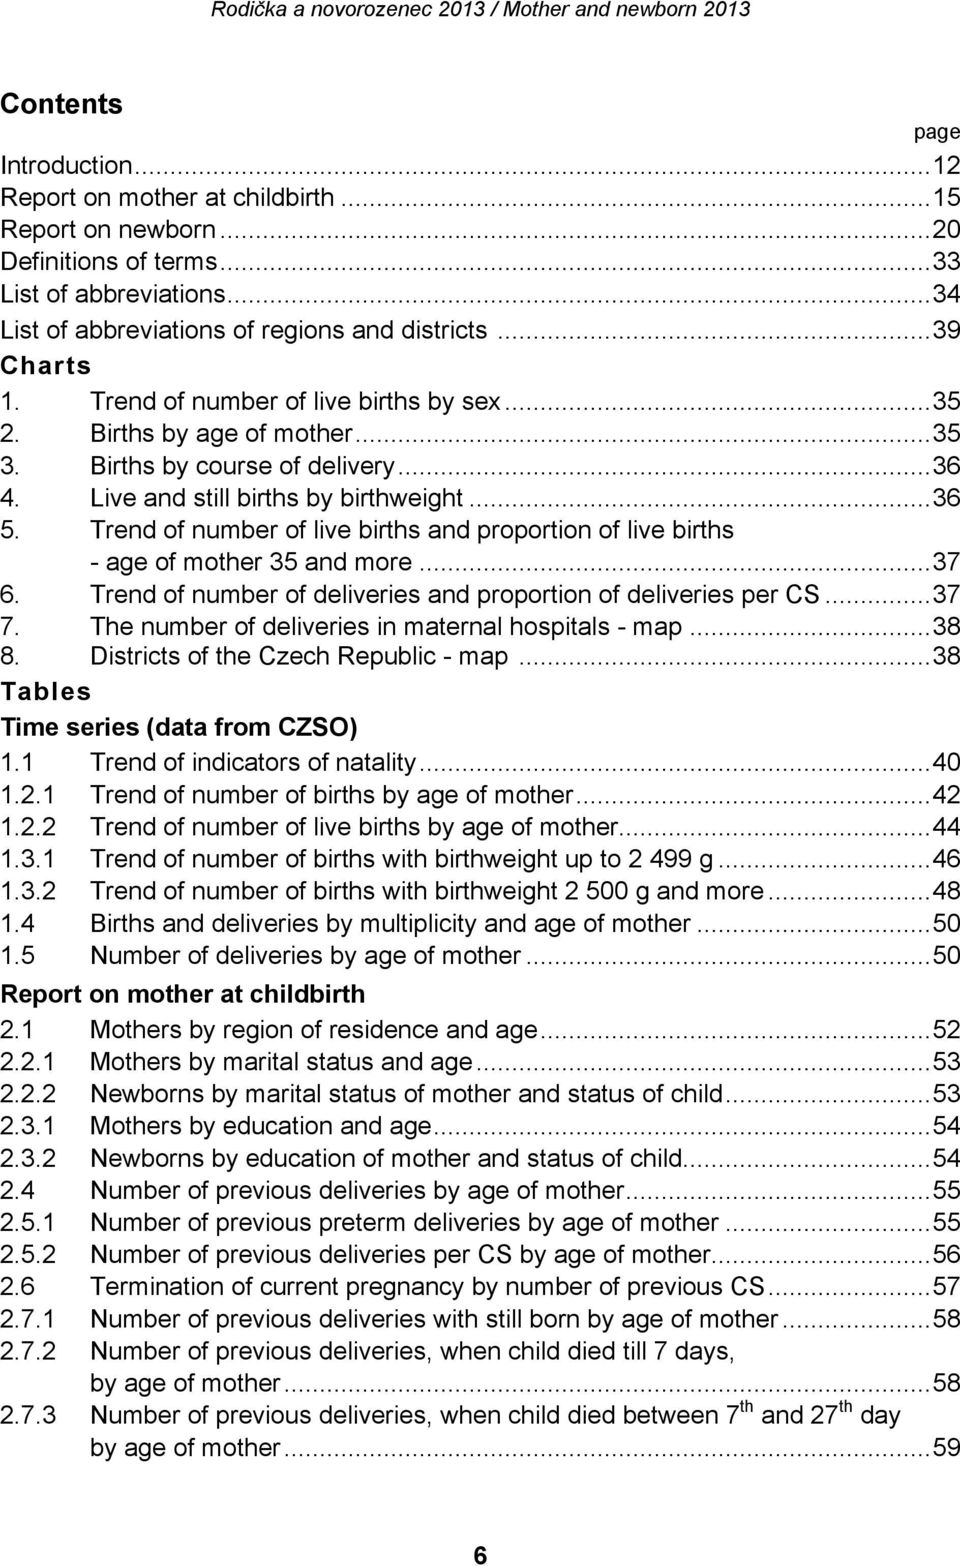 Trend of number of live births and proportion of live births - age of mother 35 and more... 37 6. Trend of number of deliveries and proportion of deliveries per CS... 37 7.